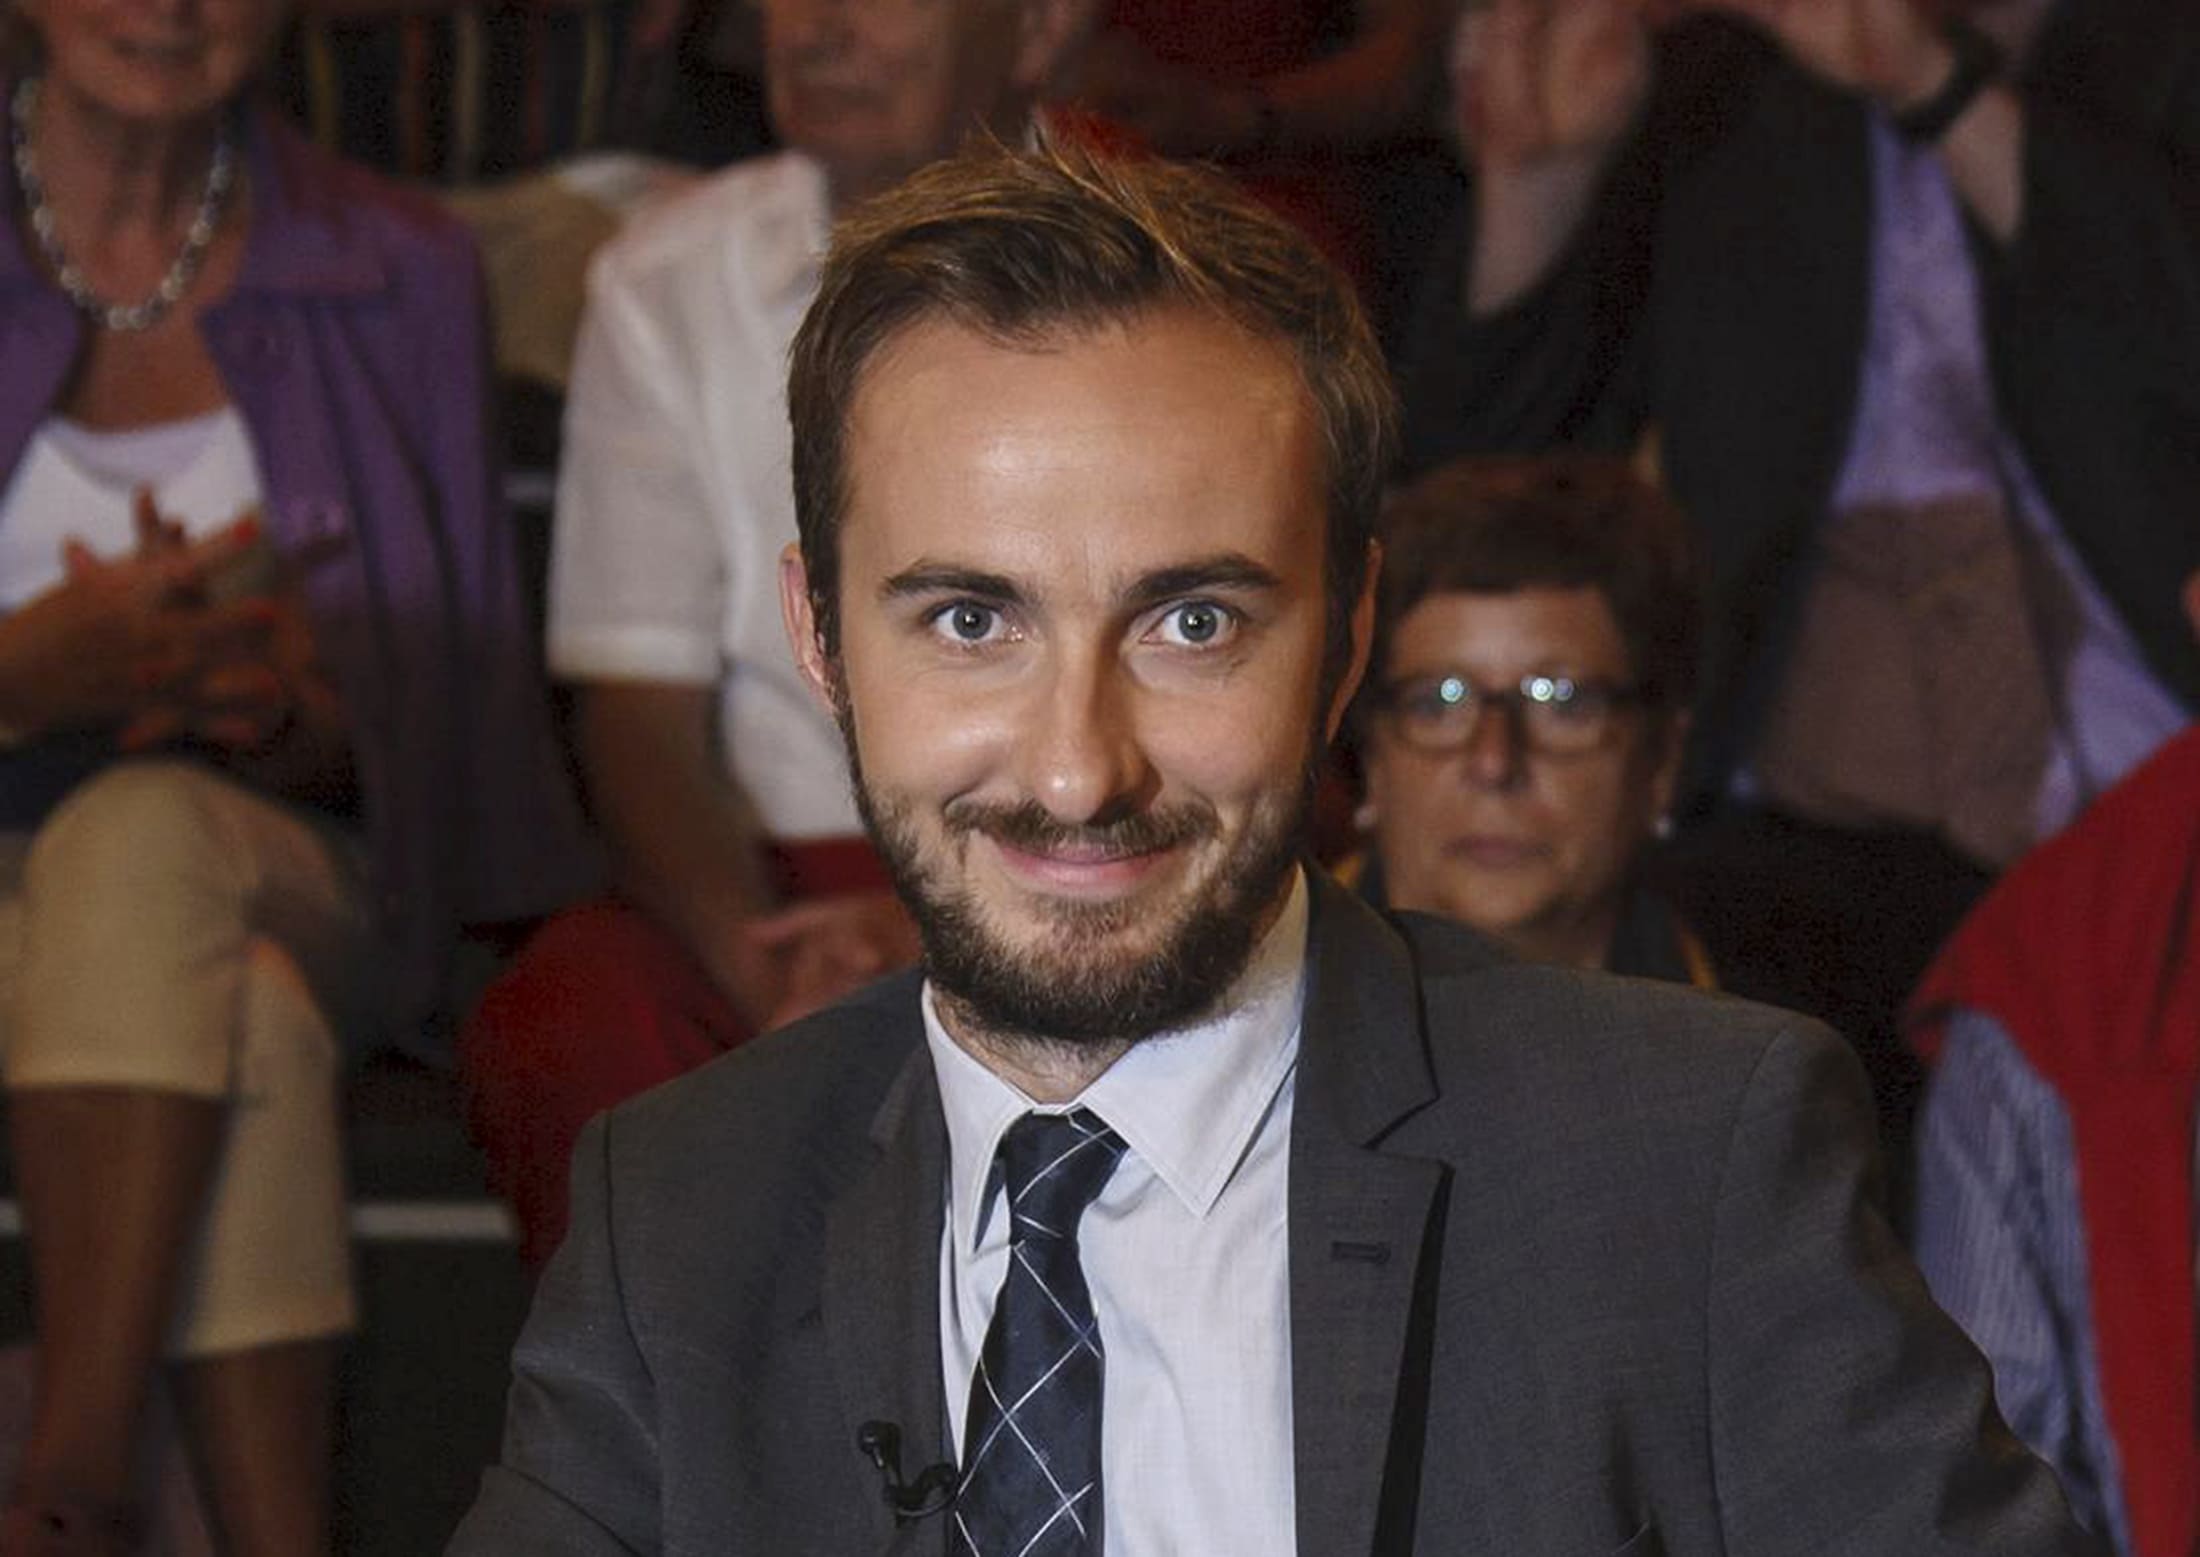 Jan Boehmermann, host of the late-night "Neo Magazin Royale", will be prosecuted in Germany for 'insulting' the Turkish president, REUTERS/Morris Mac Matzen